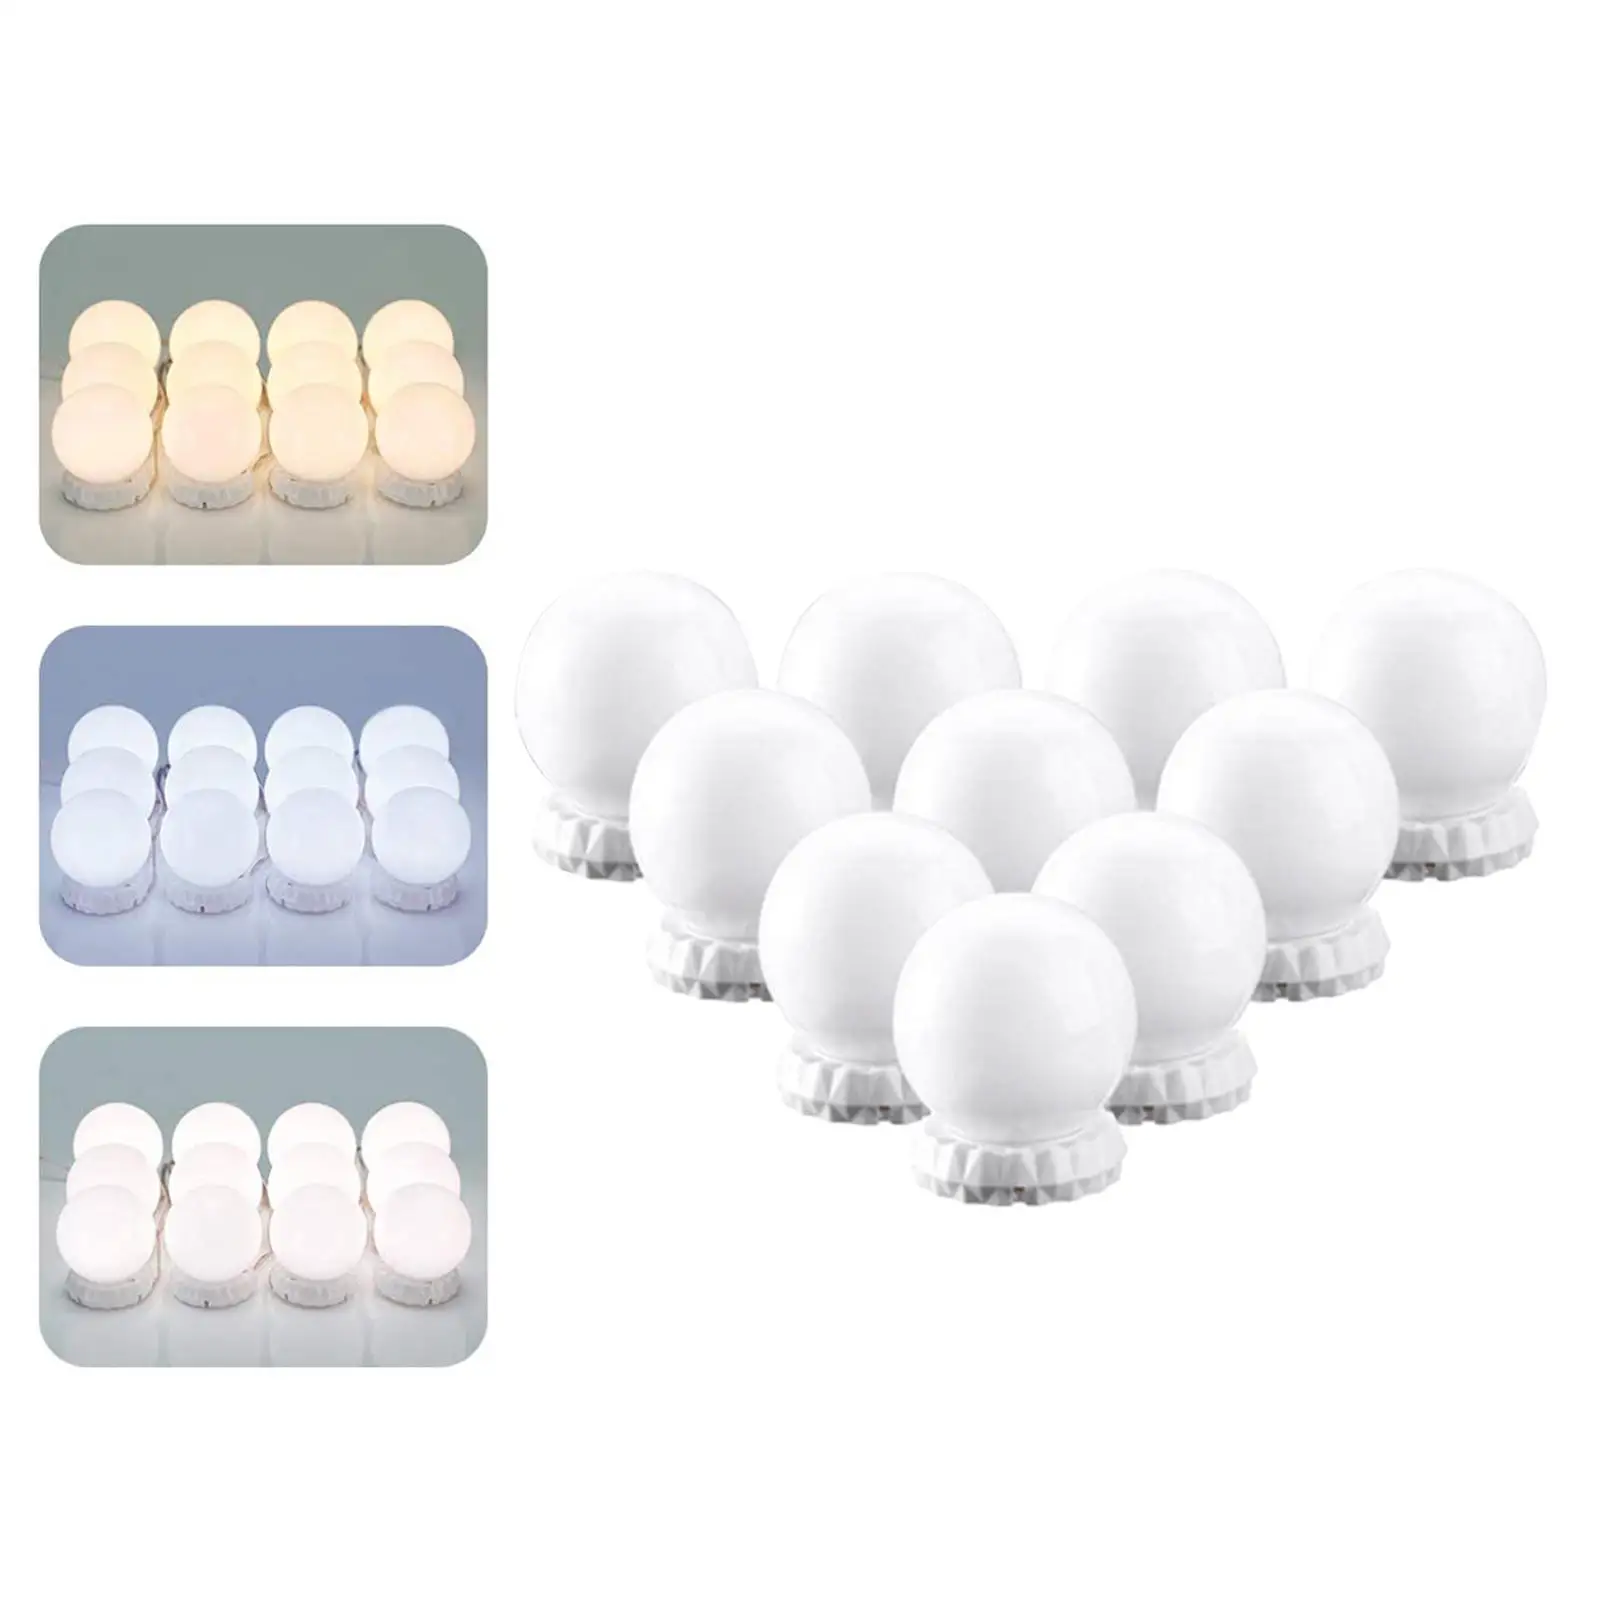 Vanity Mirror Lights Kit with 10 Globe Dimmable Bulbs for Dressing Room Mirror Lights10 LED Dimmable Light Bulbs USB